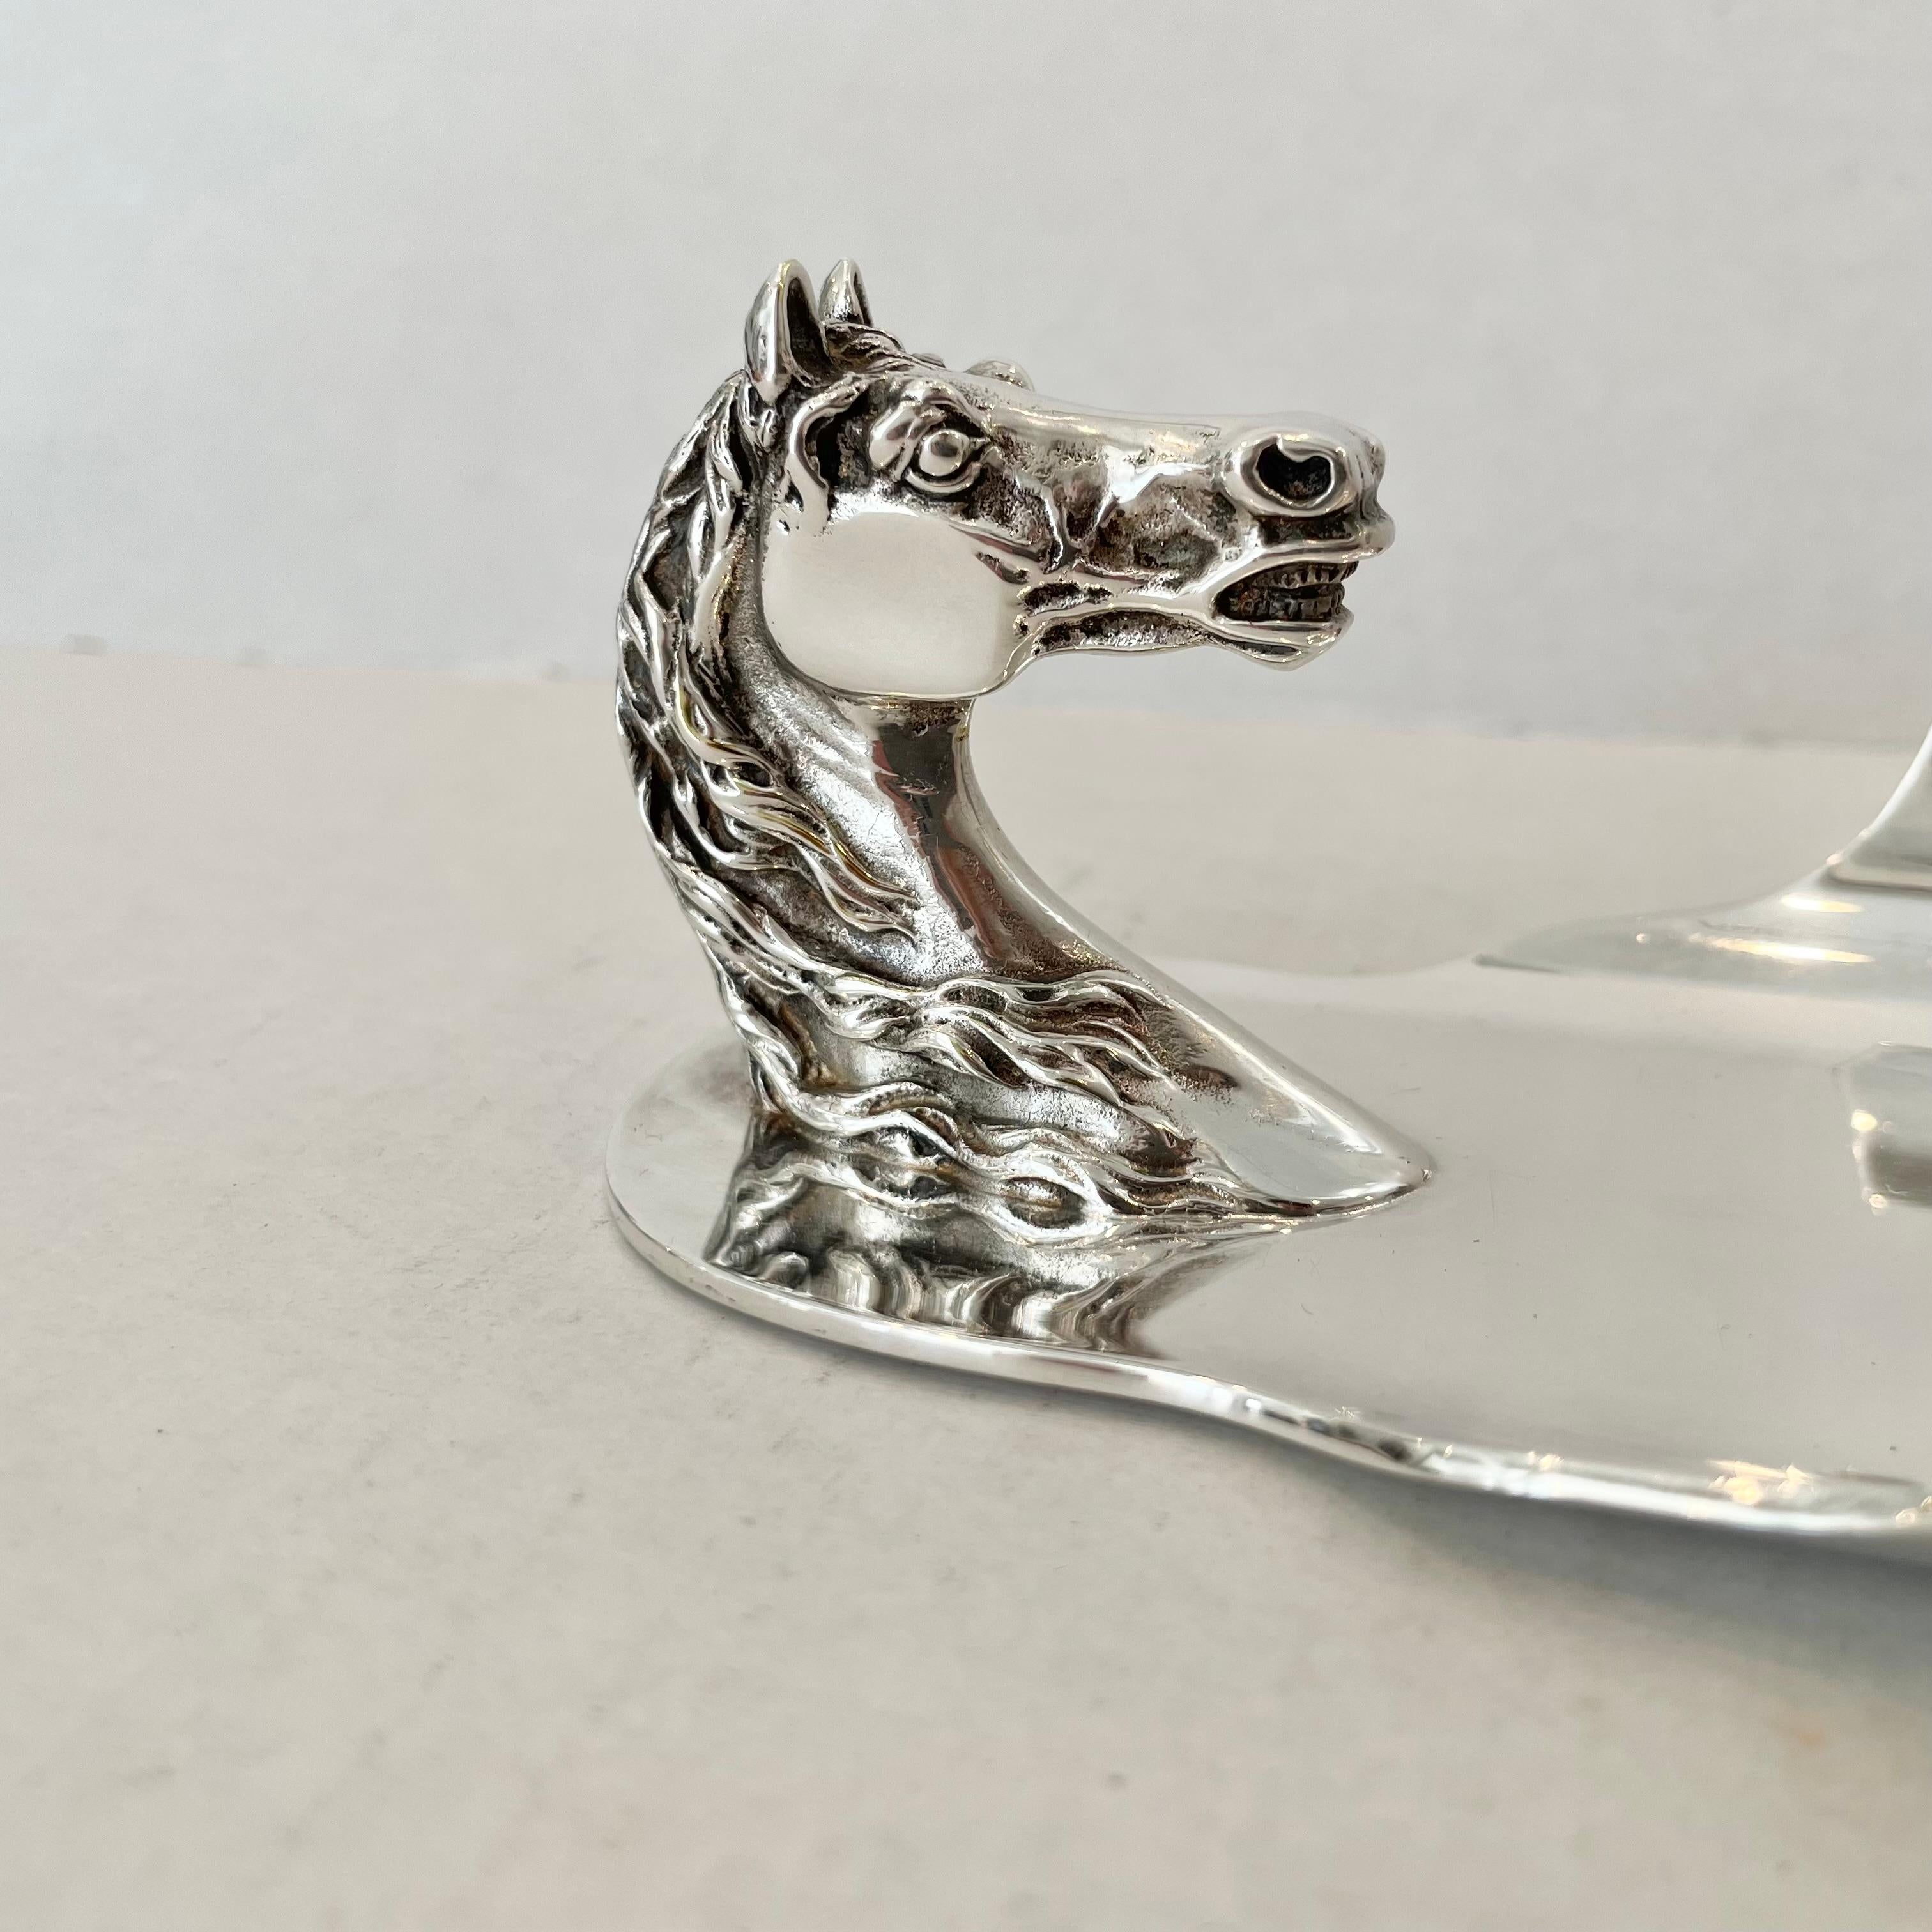 French Hermes Equestrian Desk Tray, 1960s France For Sale